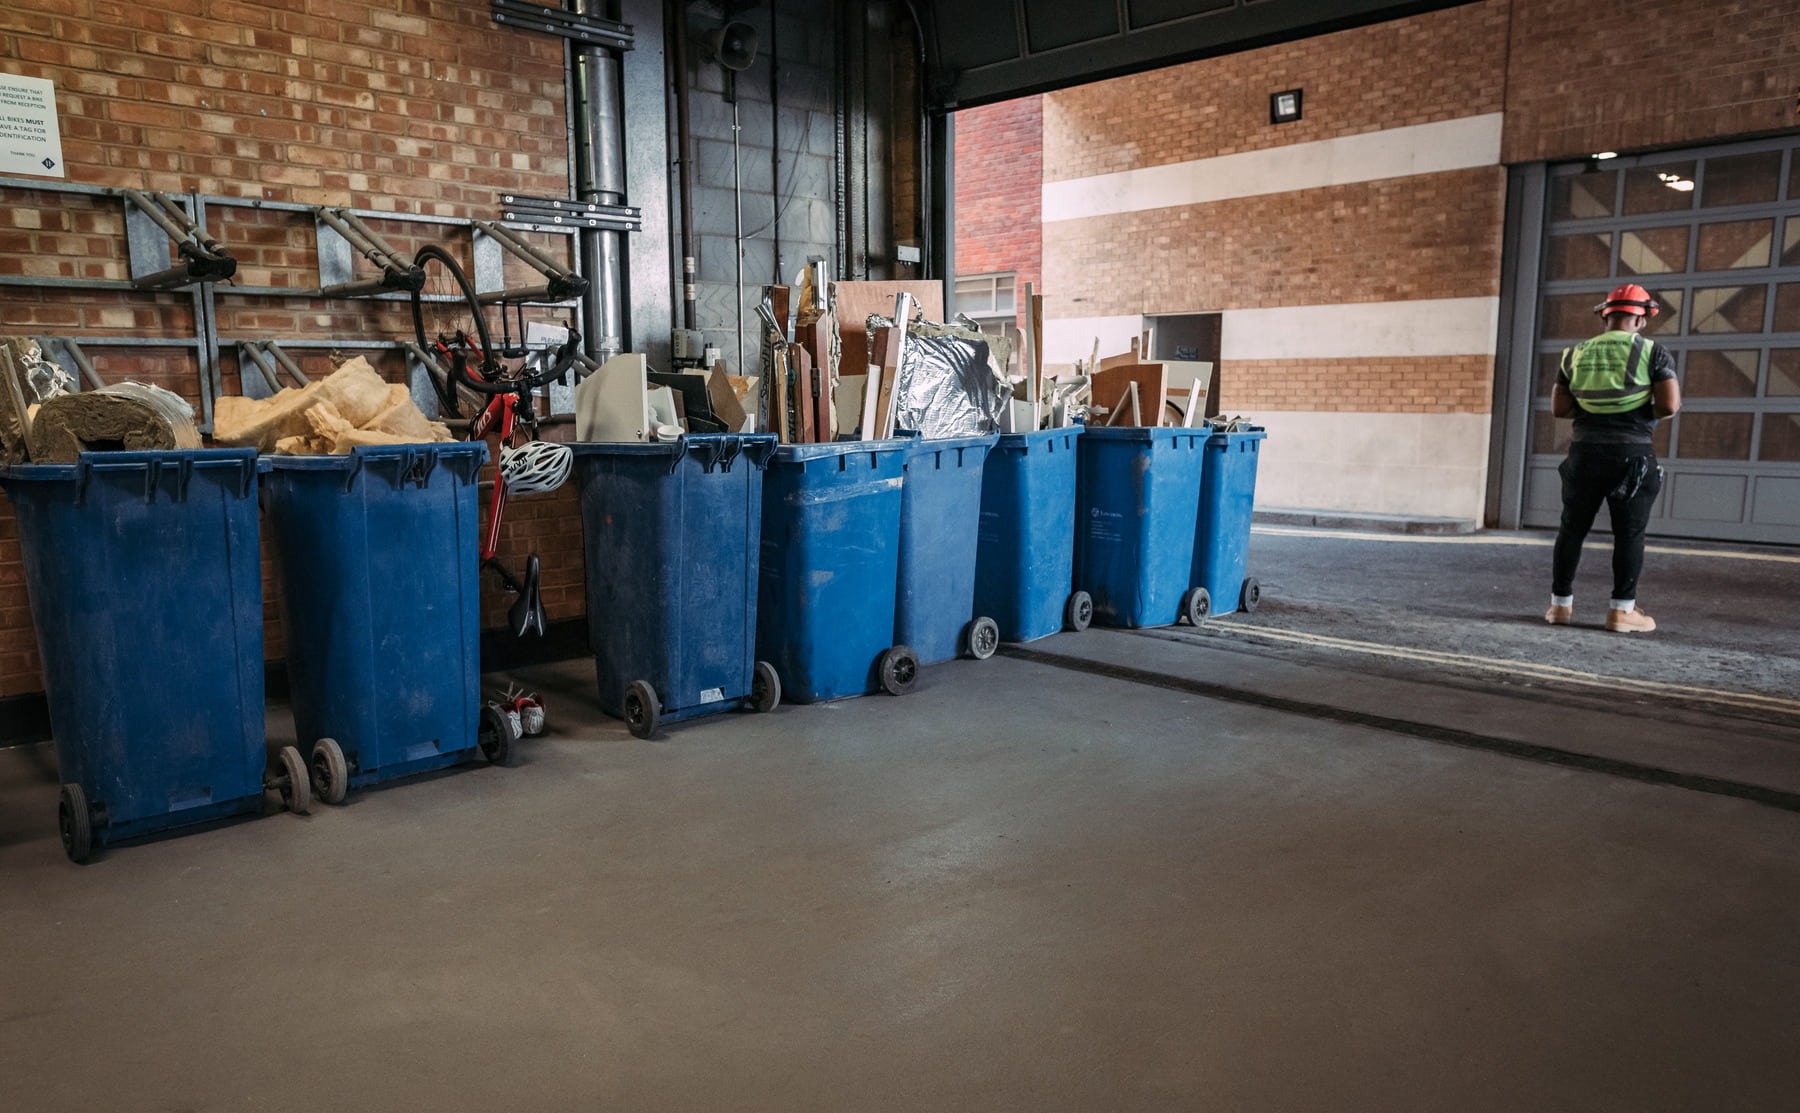 Line of full recycling bins